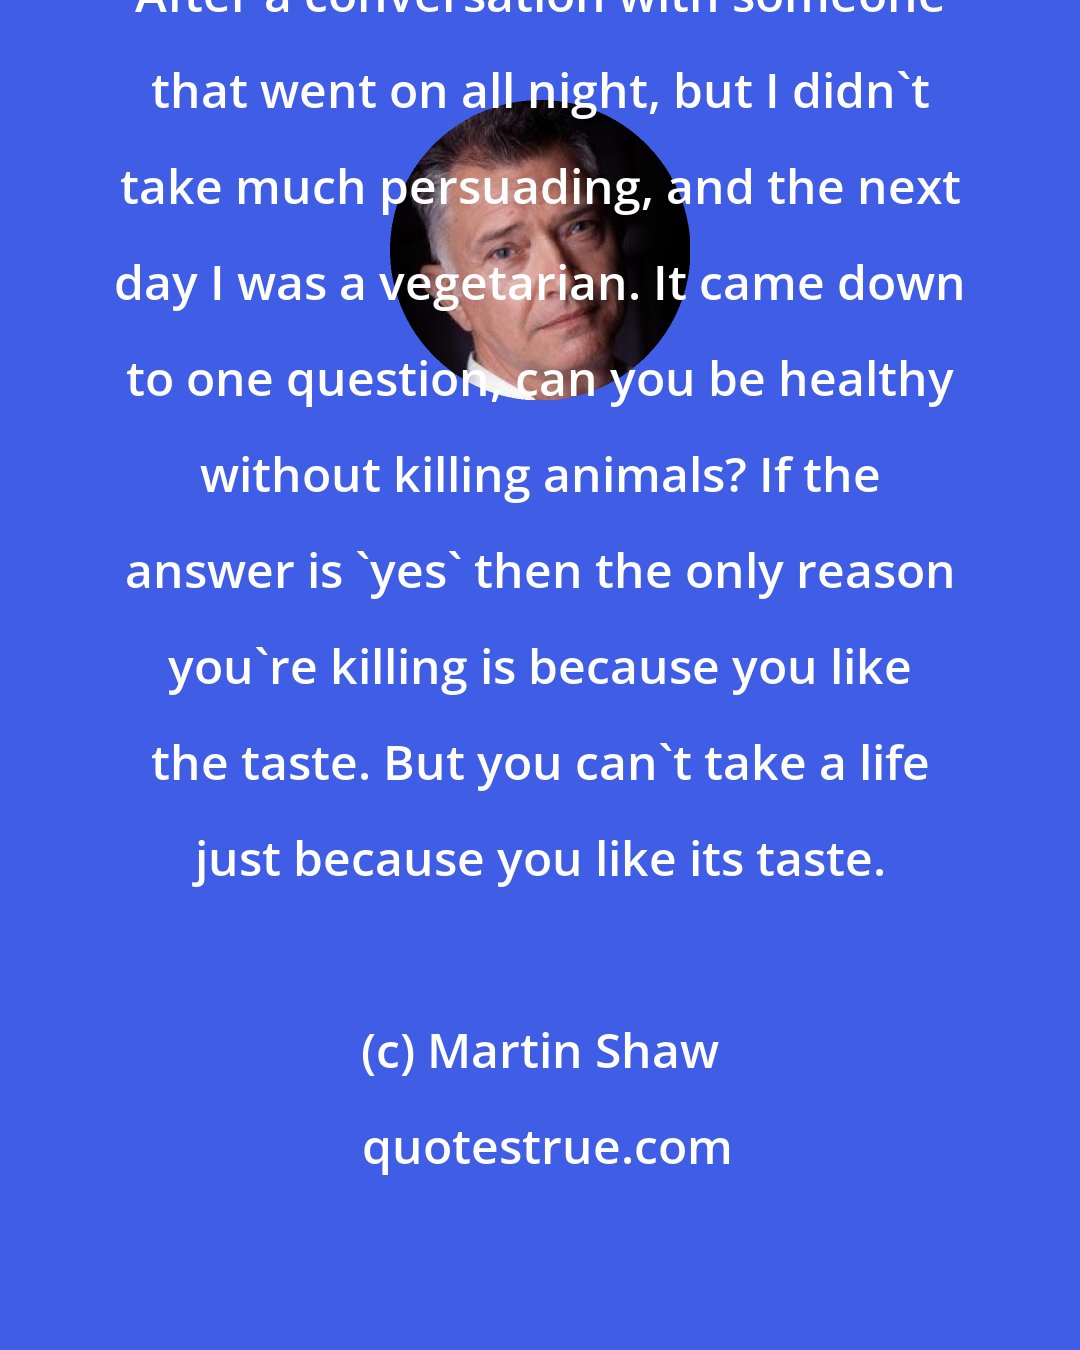 Martin Shaw: After a conversation with someone that went on all night, but I didn't take much persuading, and the next day I was a vegetarian. It came down to one question, can you be healthy without killing animals? If the answer is 'yes' then the only reason you're killing is because you like the taste. But you can't take a life just because you like its taste.